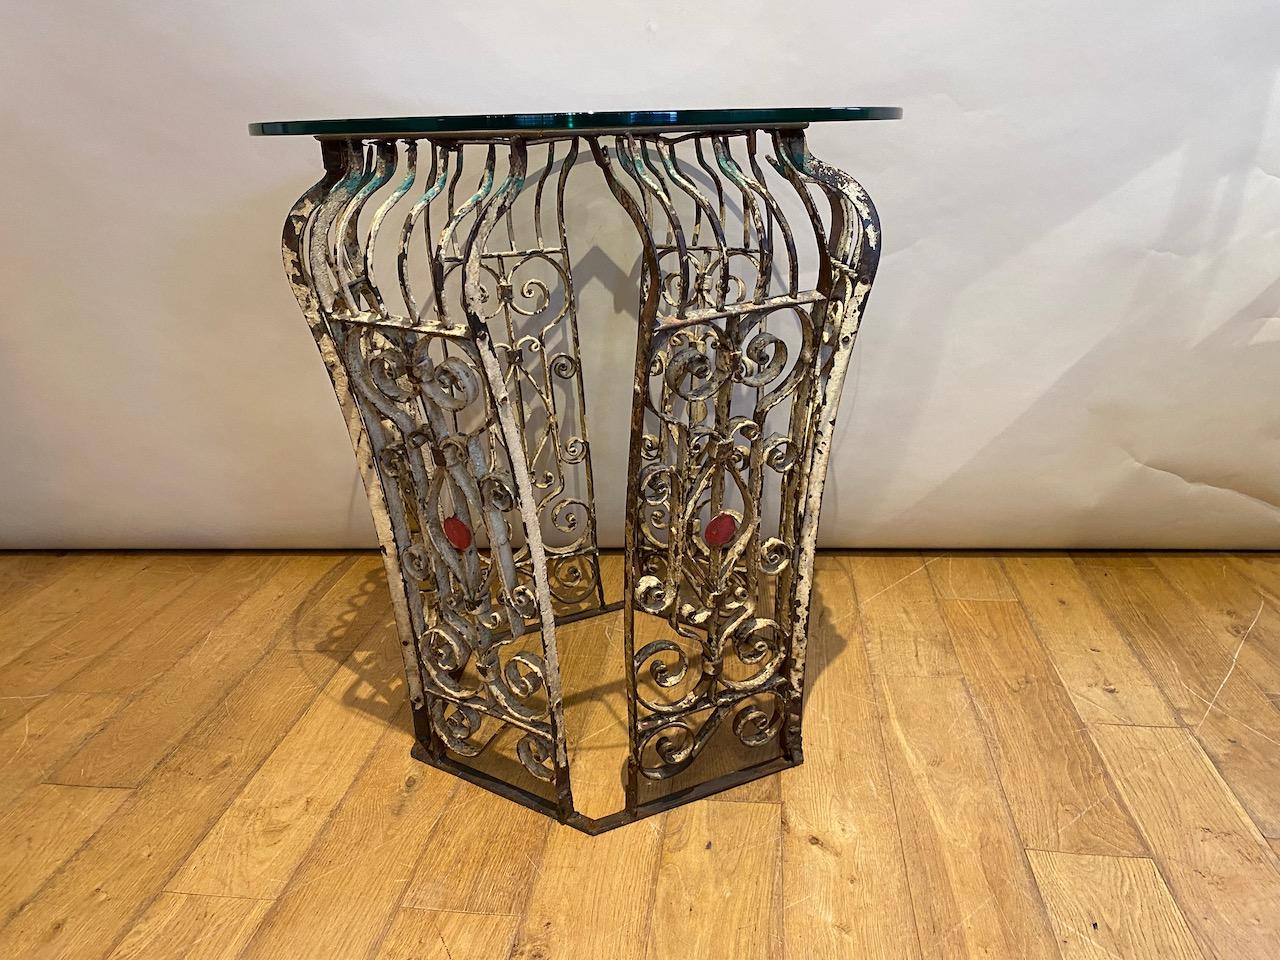 Wrought Iron Table with Glass Top